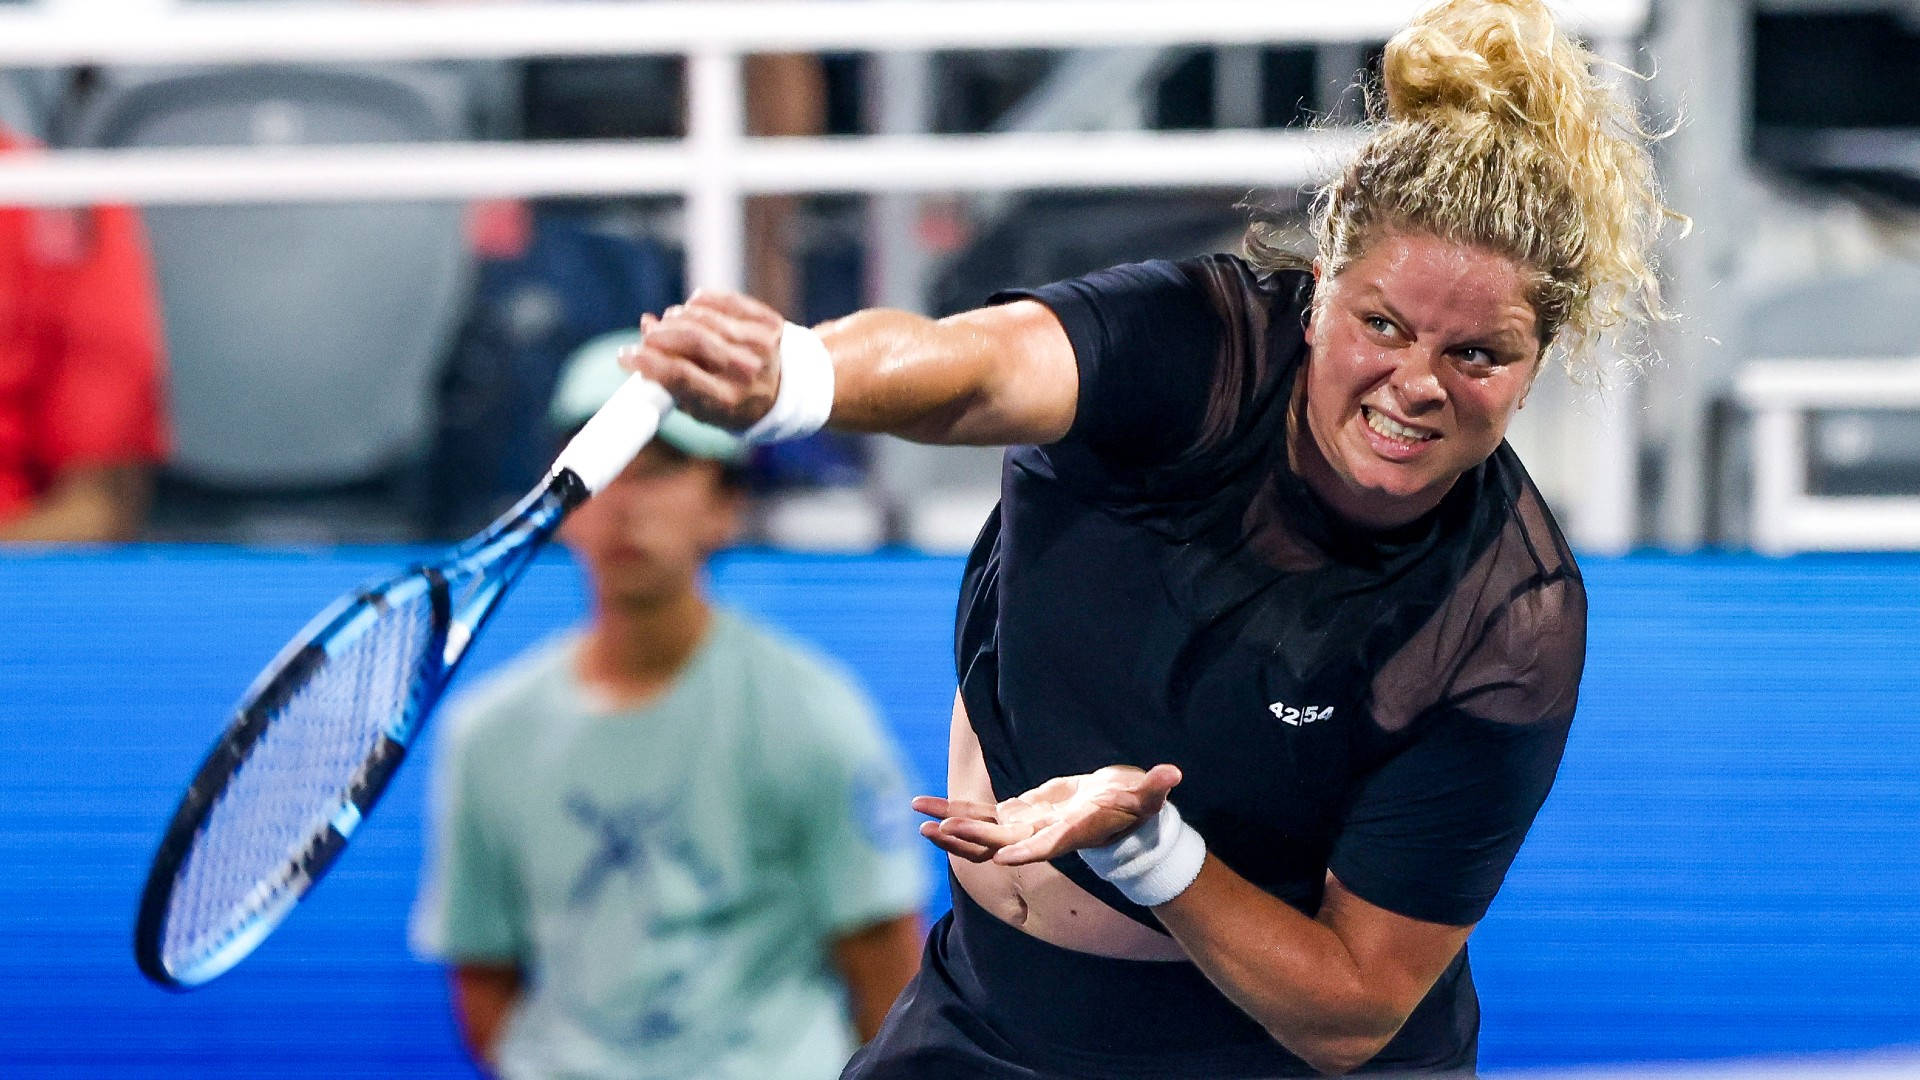 Kim Clijsters in action: A Triumph of Power and Grace Wallpaper